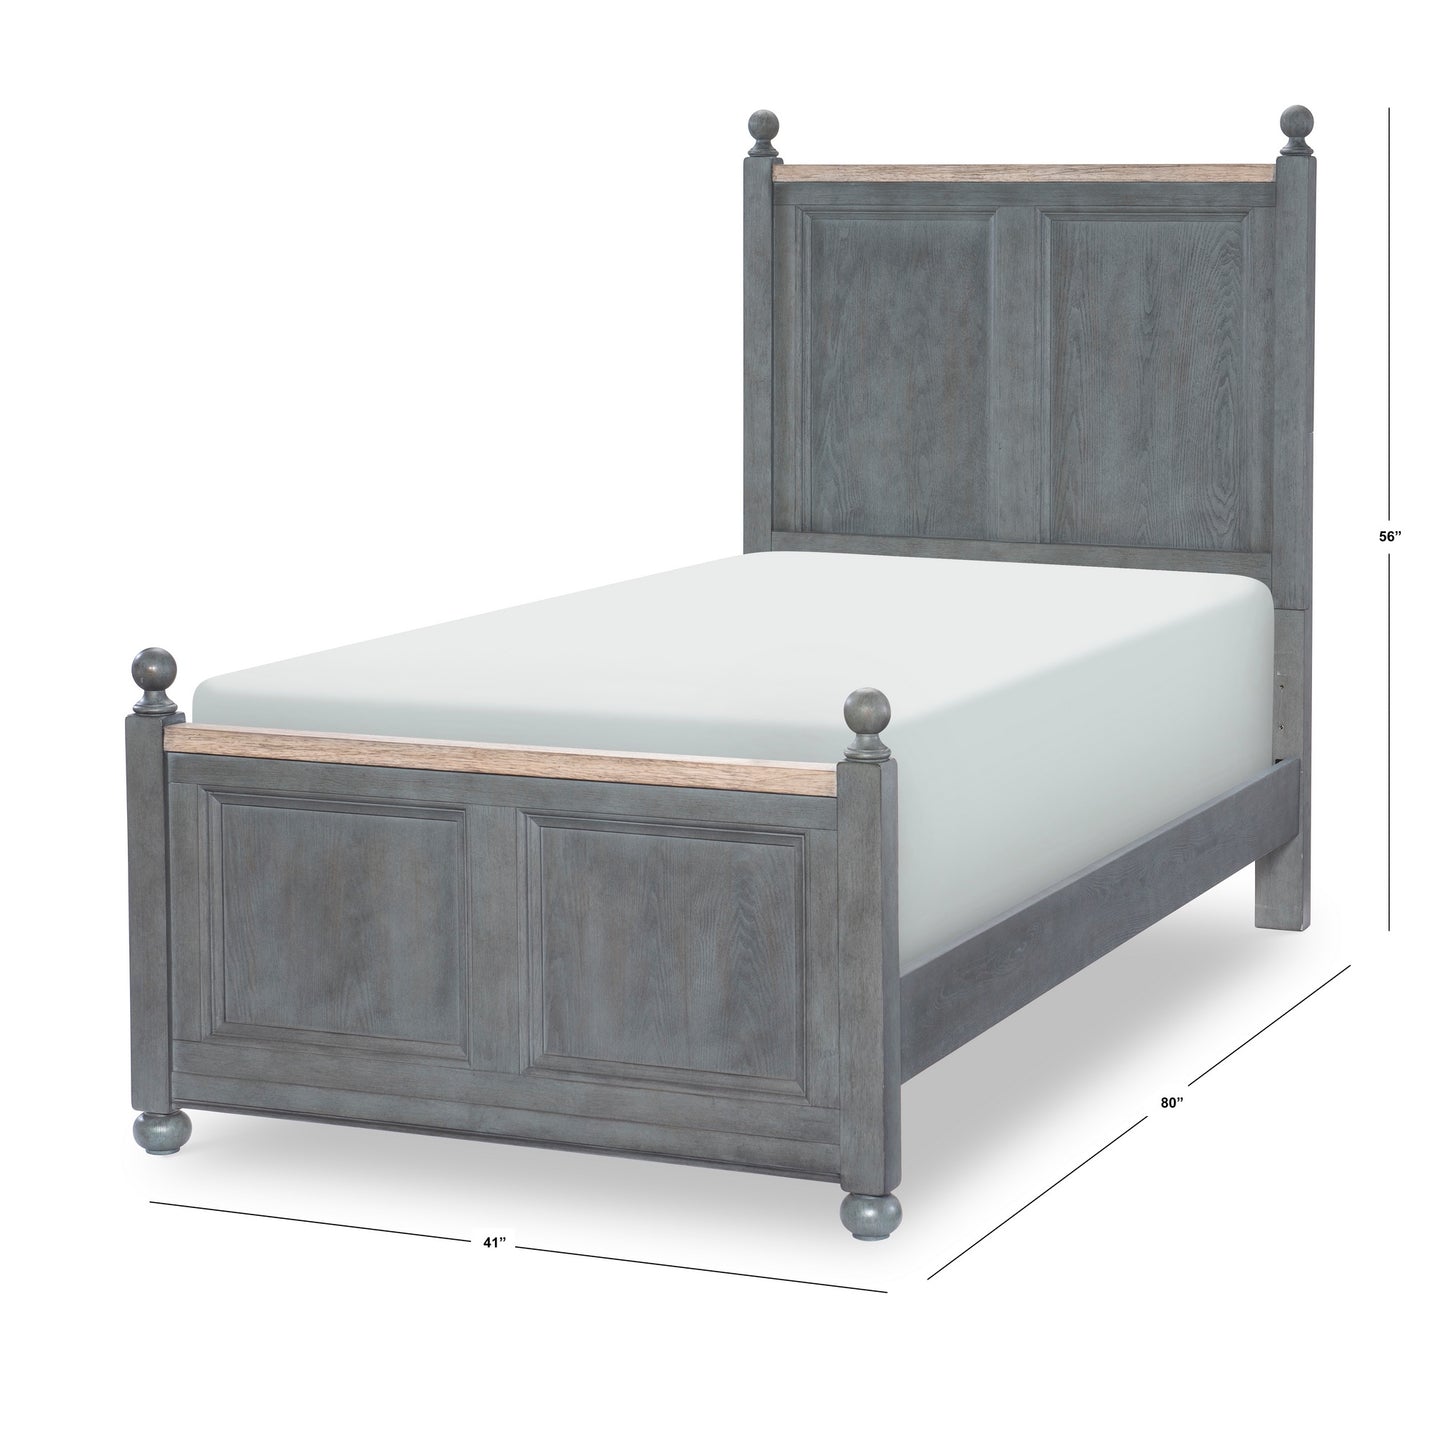 Cone Mills Post Twin Bed